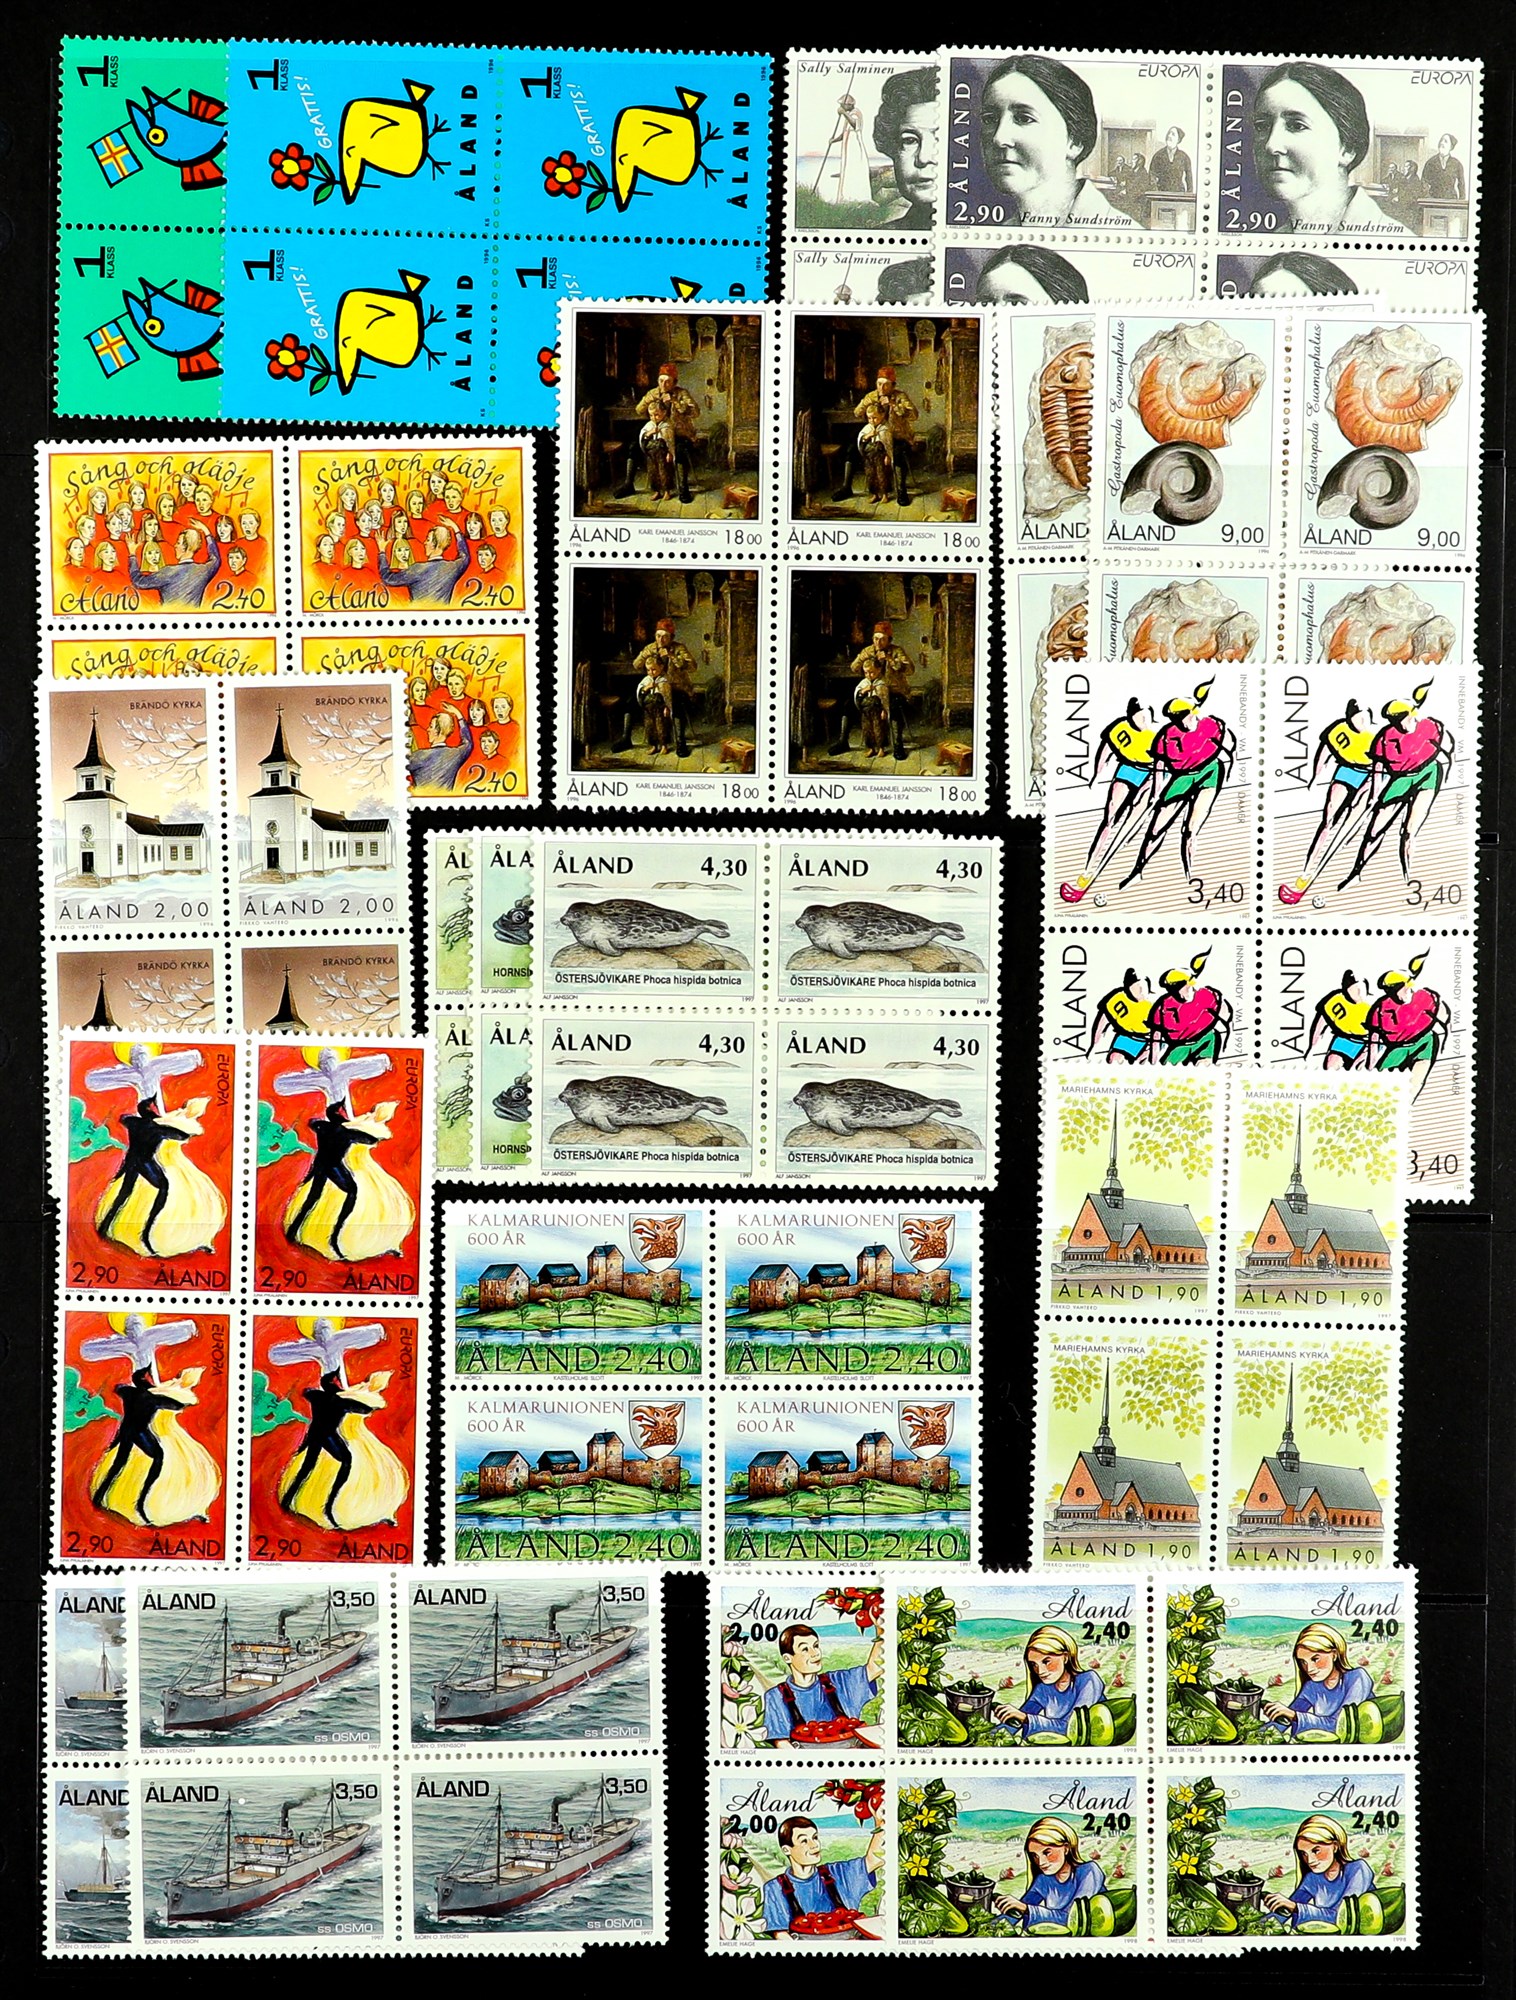 ALAND ISLANDS 1984 - 2001 COLLECTION complete for the period in never hinged mint blocks 4, also all - Image 4 of 12